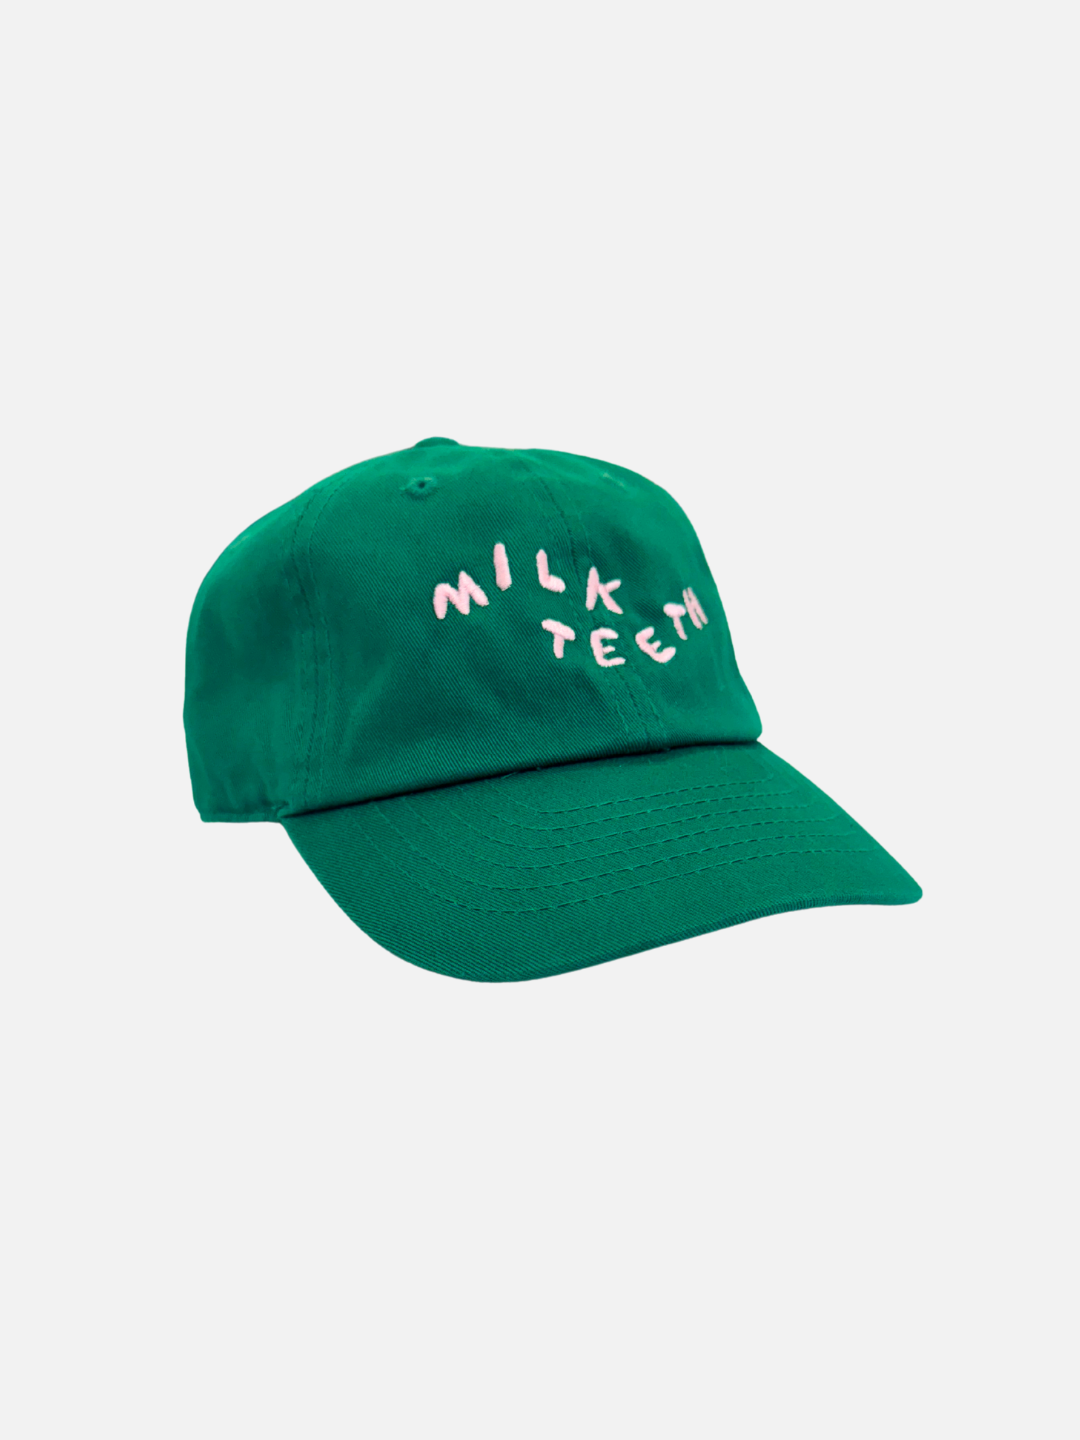 A front view of the Milk Teeth Cap with pink embroidery